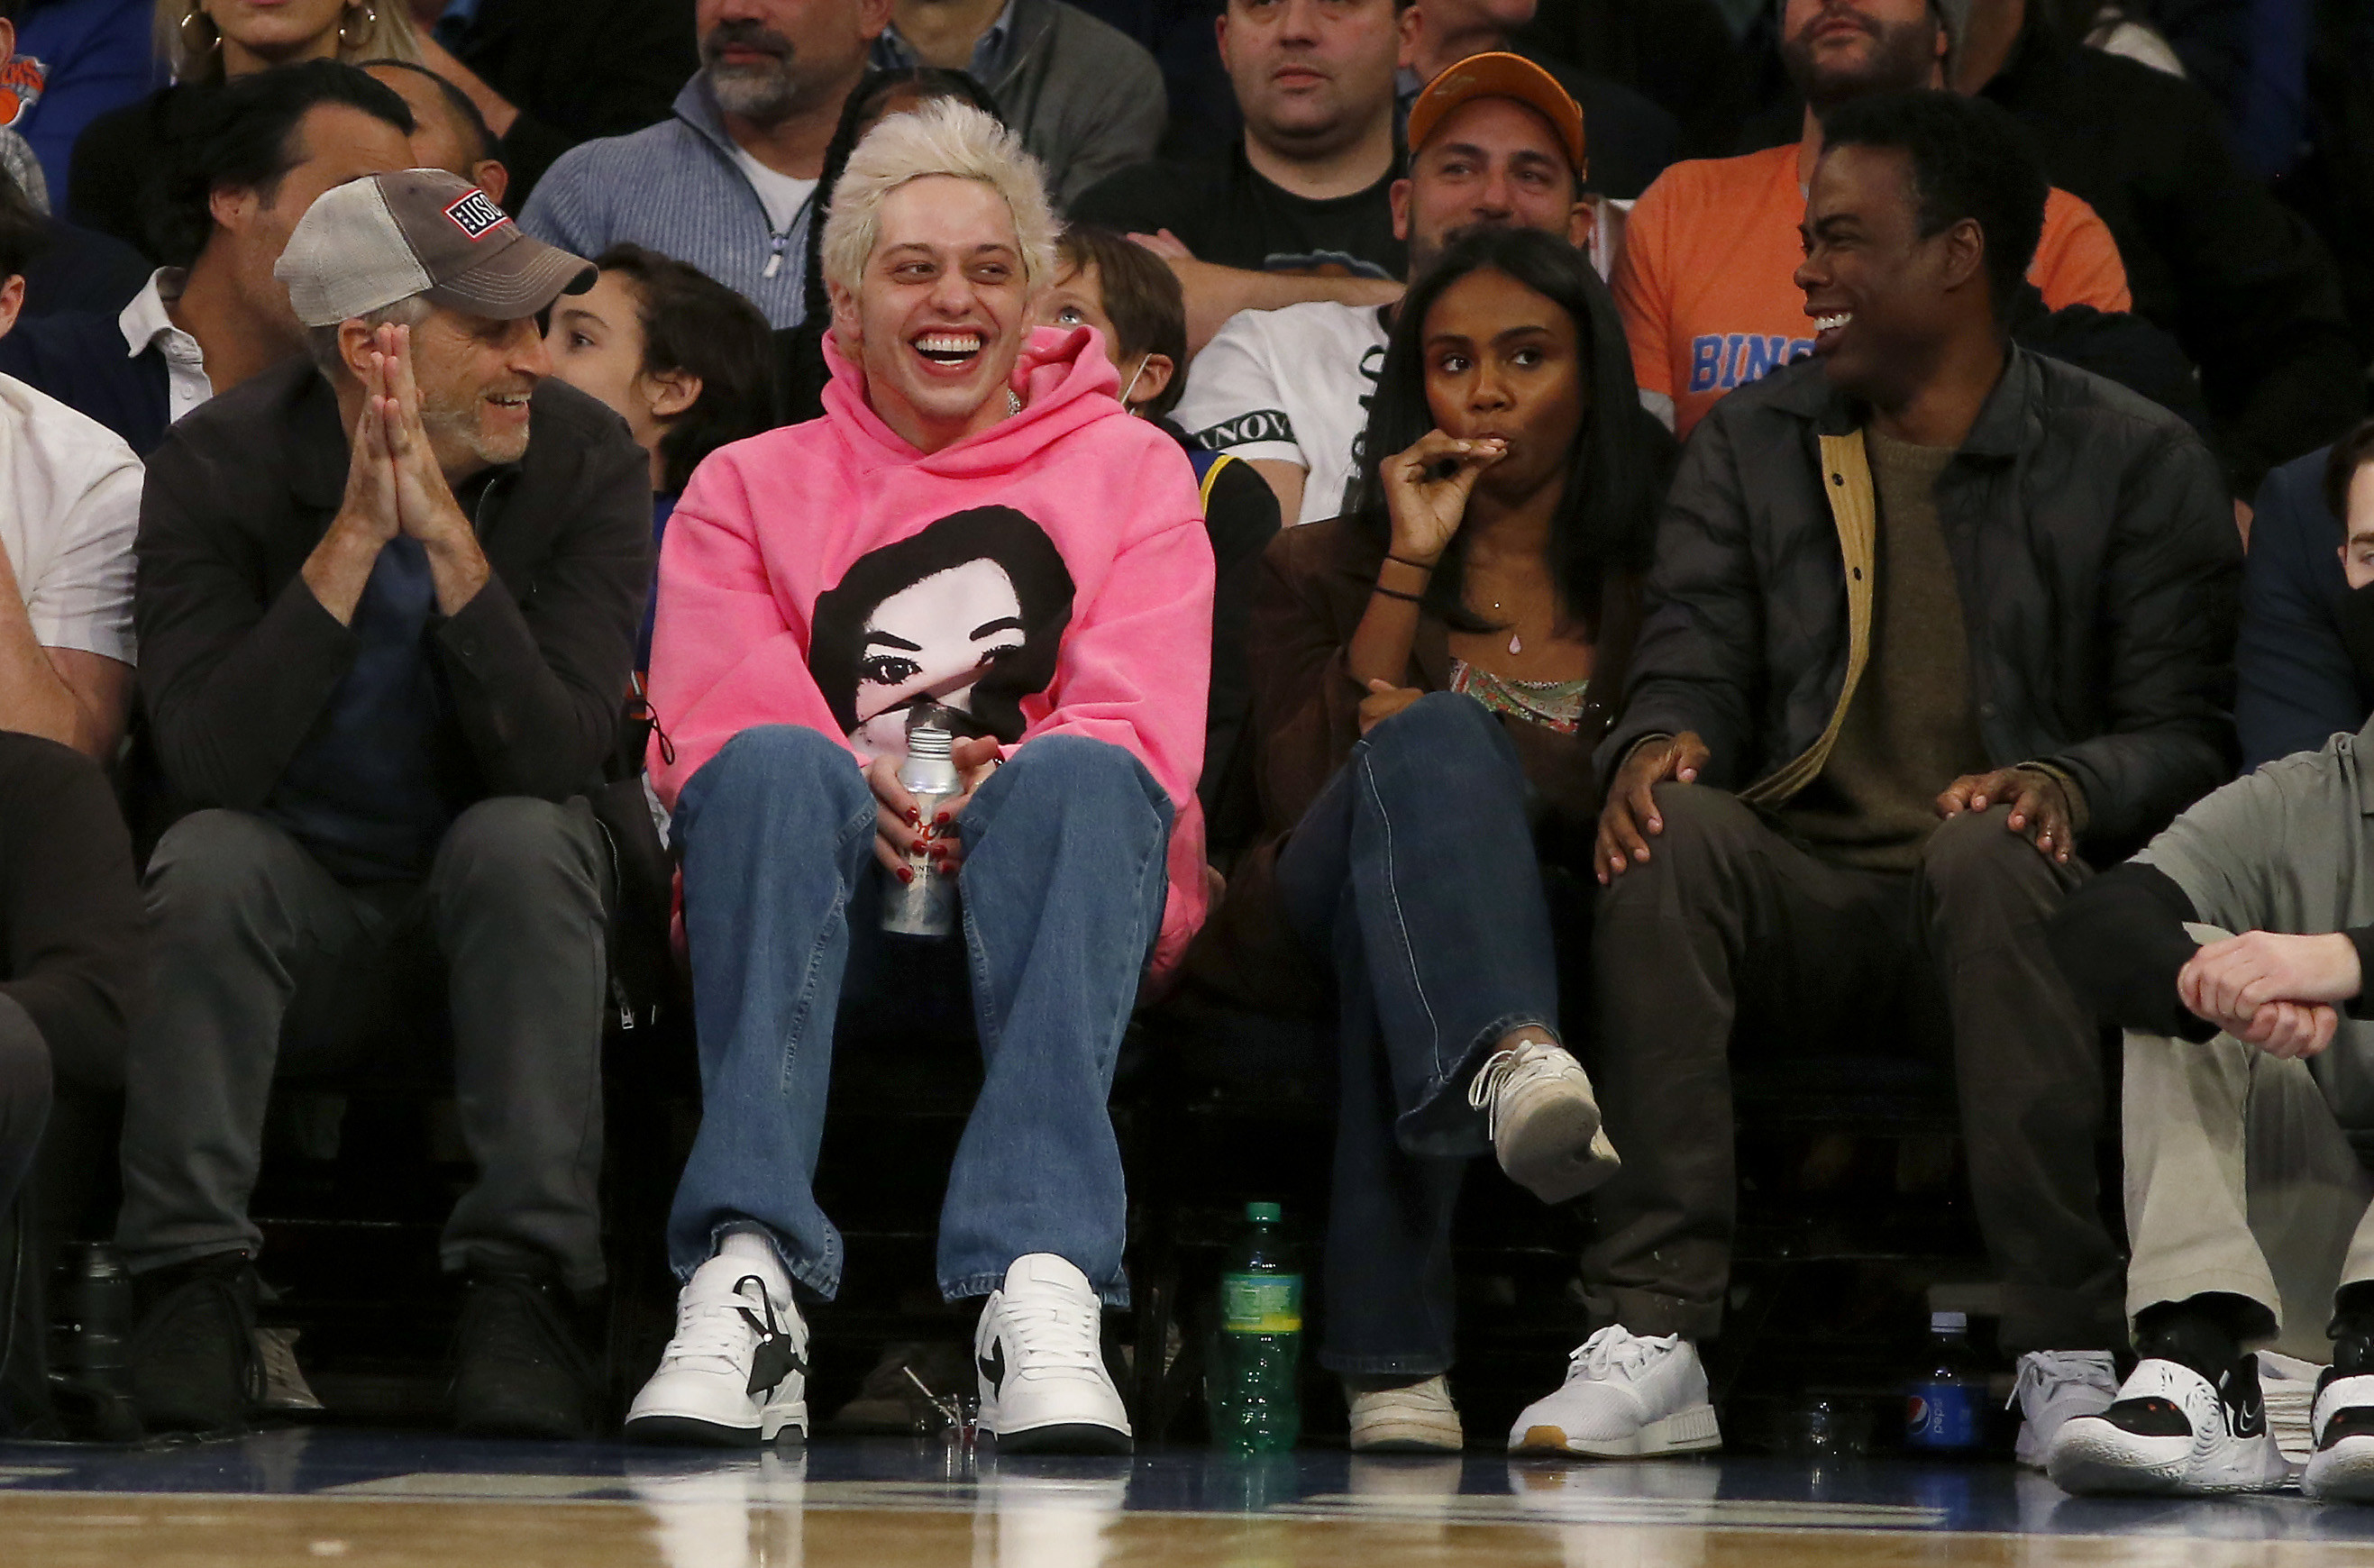 Pete at a basketball game with Chris Rock and Jon Stewart